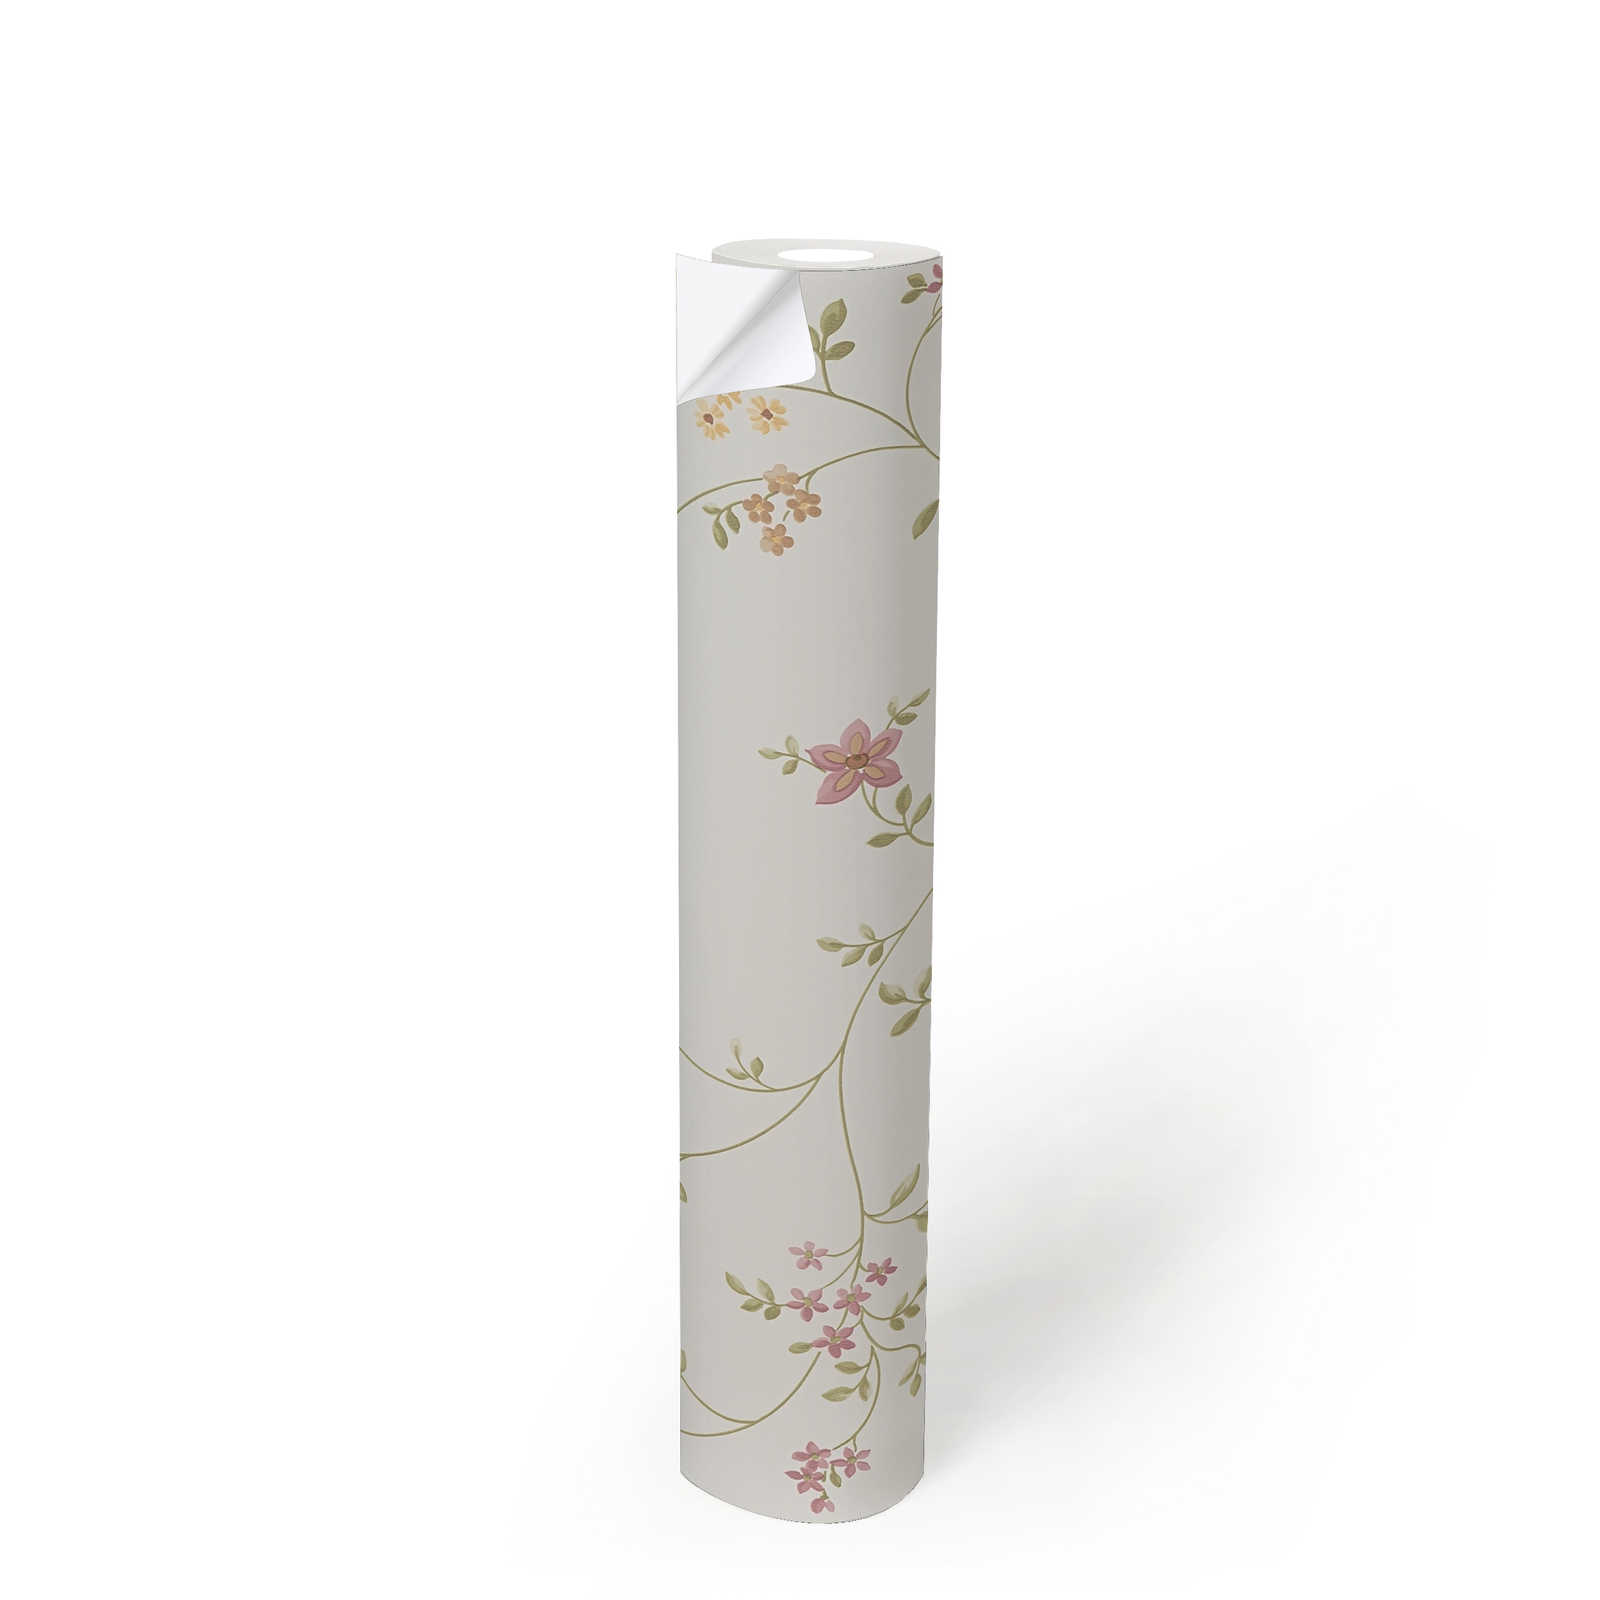             Self-adhesive wallpaper | floral pattern with subtle vines - cream, green, beige
        